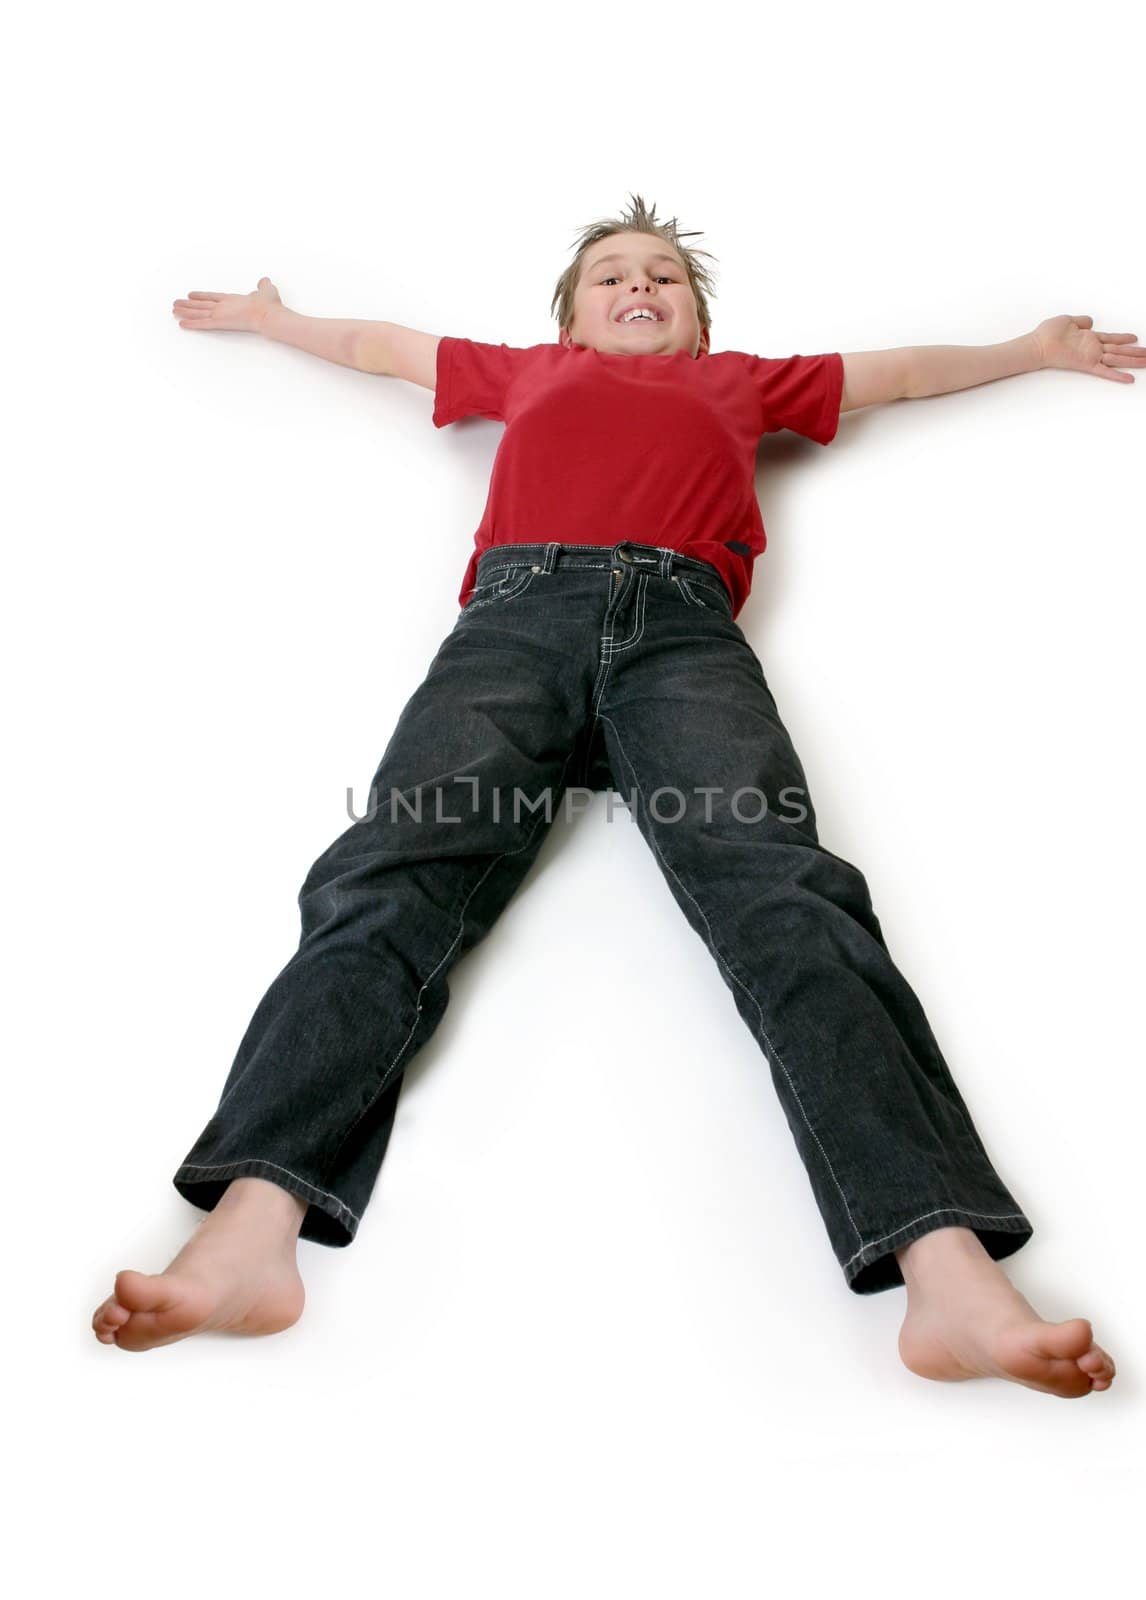 A boy lies outstretched on a floor.